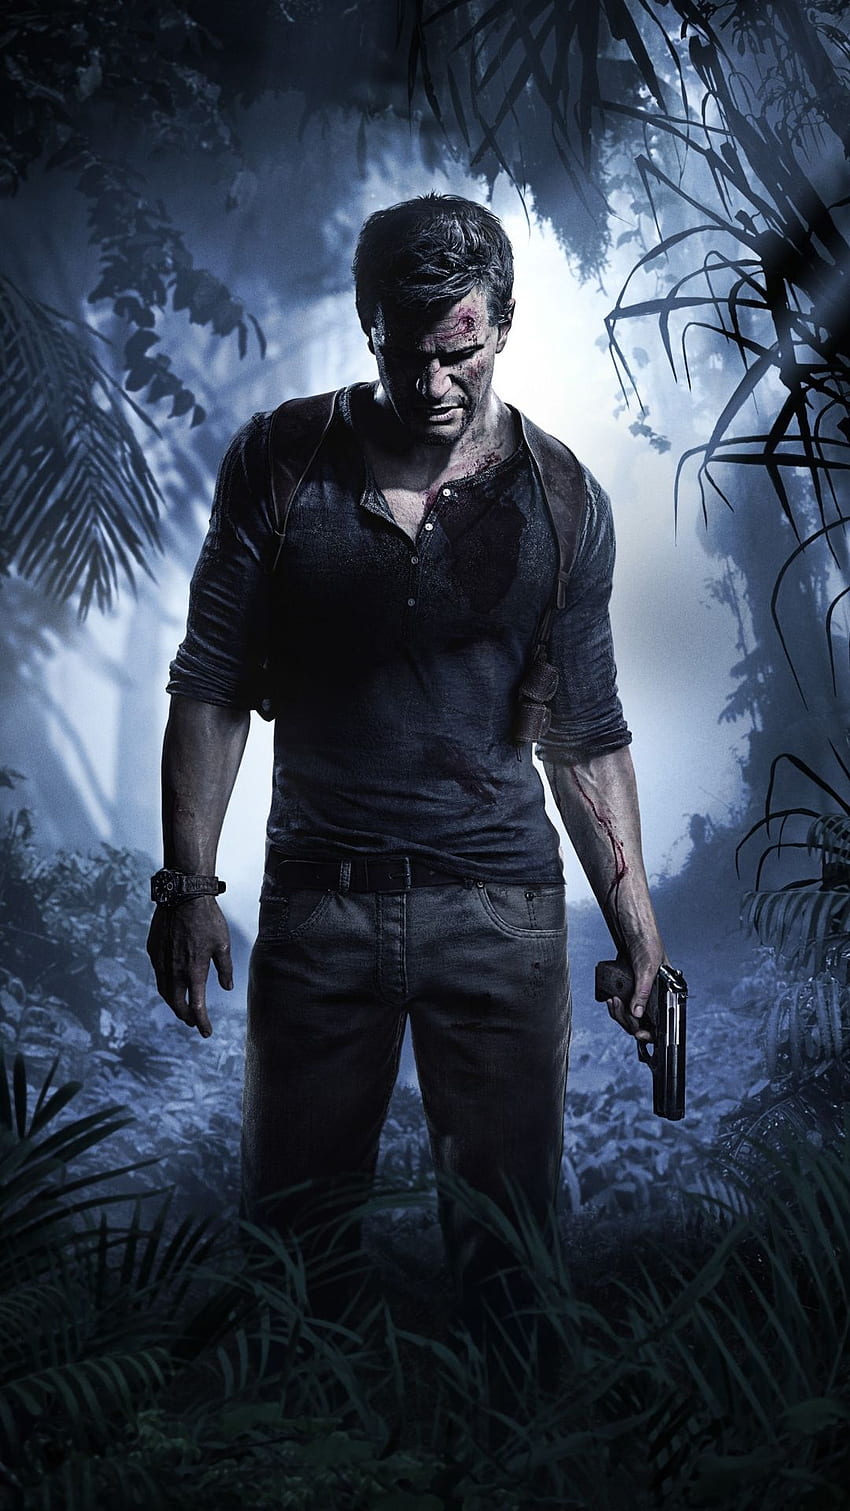 Uncharted 4 Home Screen. Uncharted artwork, Uncharted, Uncharted game, Uncharted 4 iPhone HD phone wallpaper